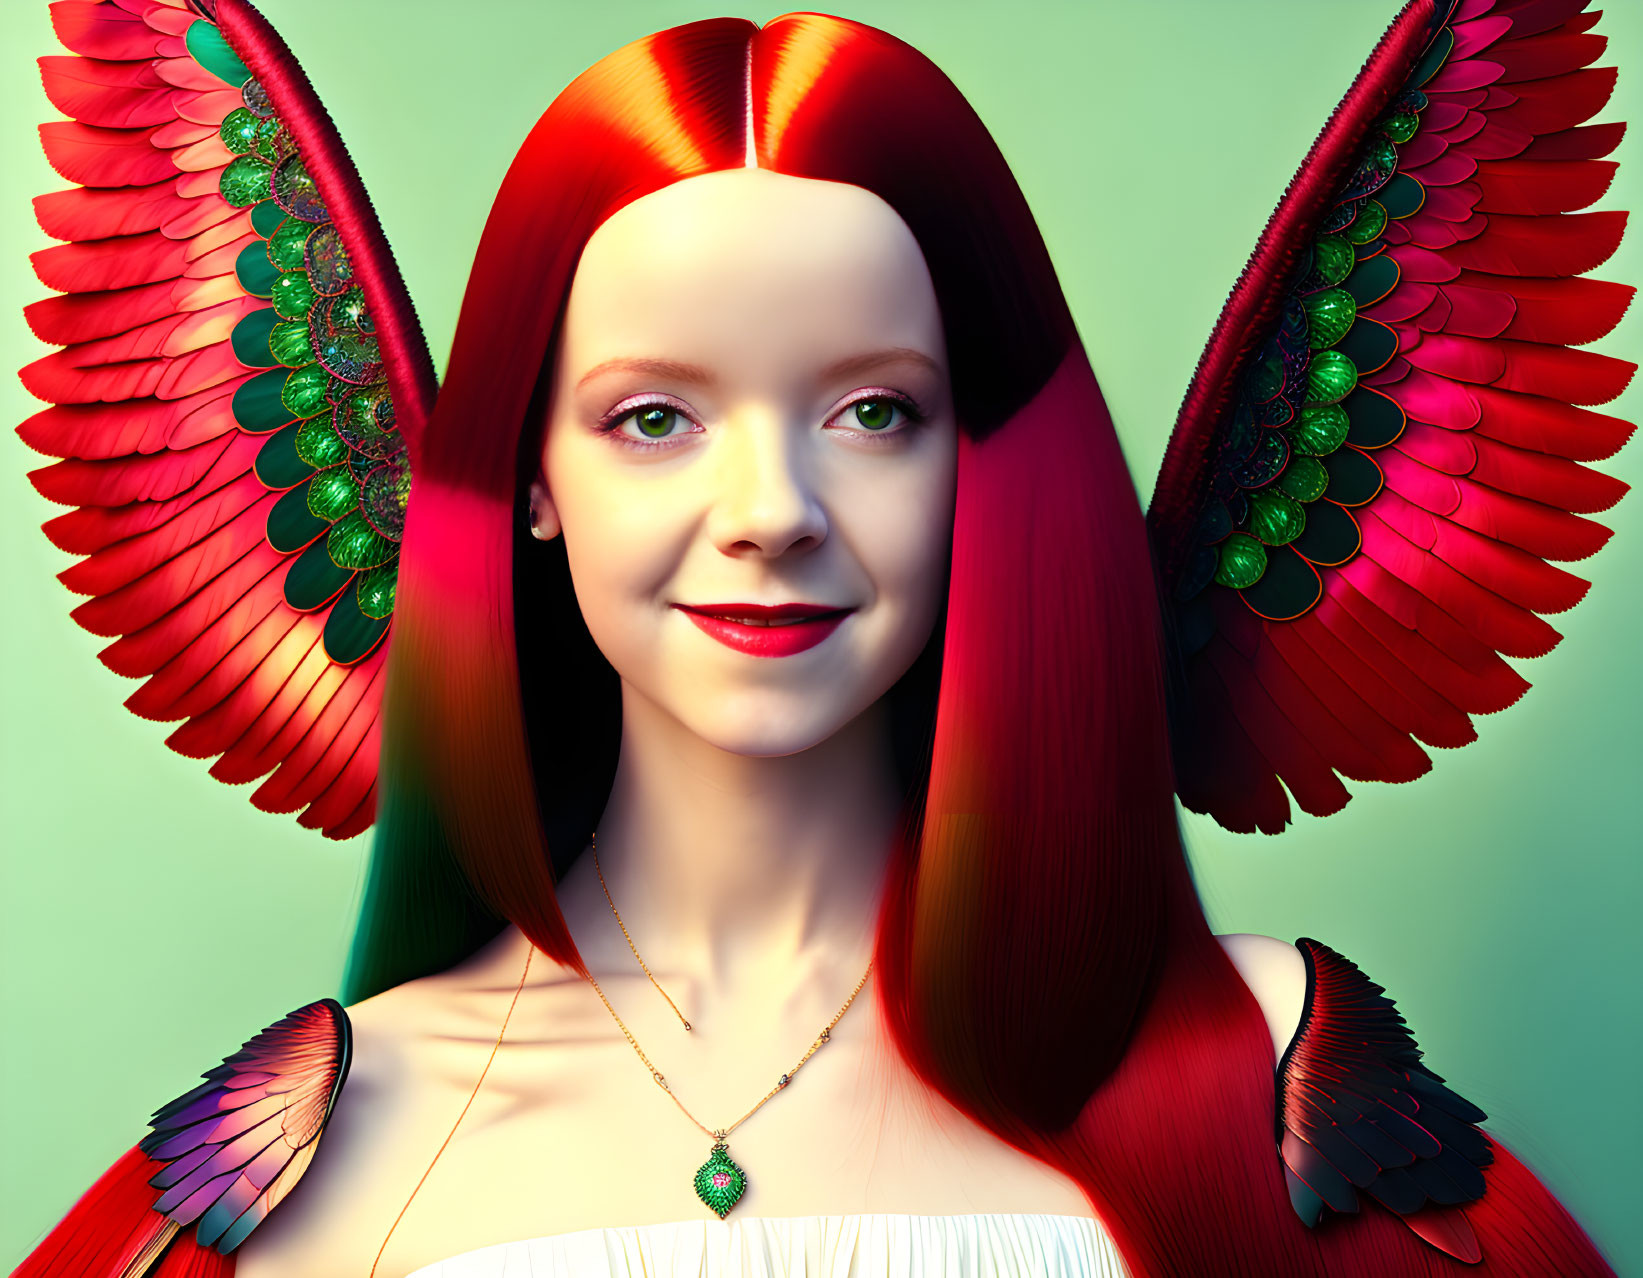 Smiling woman with red and green gradient hair and bird-like wings on a green background